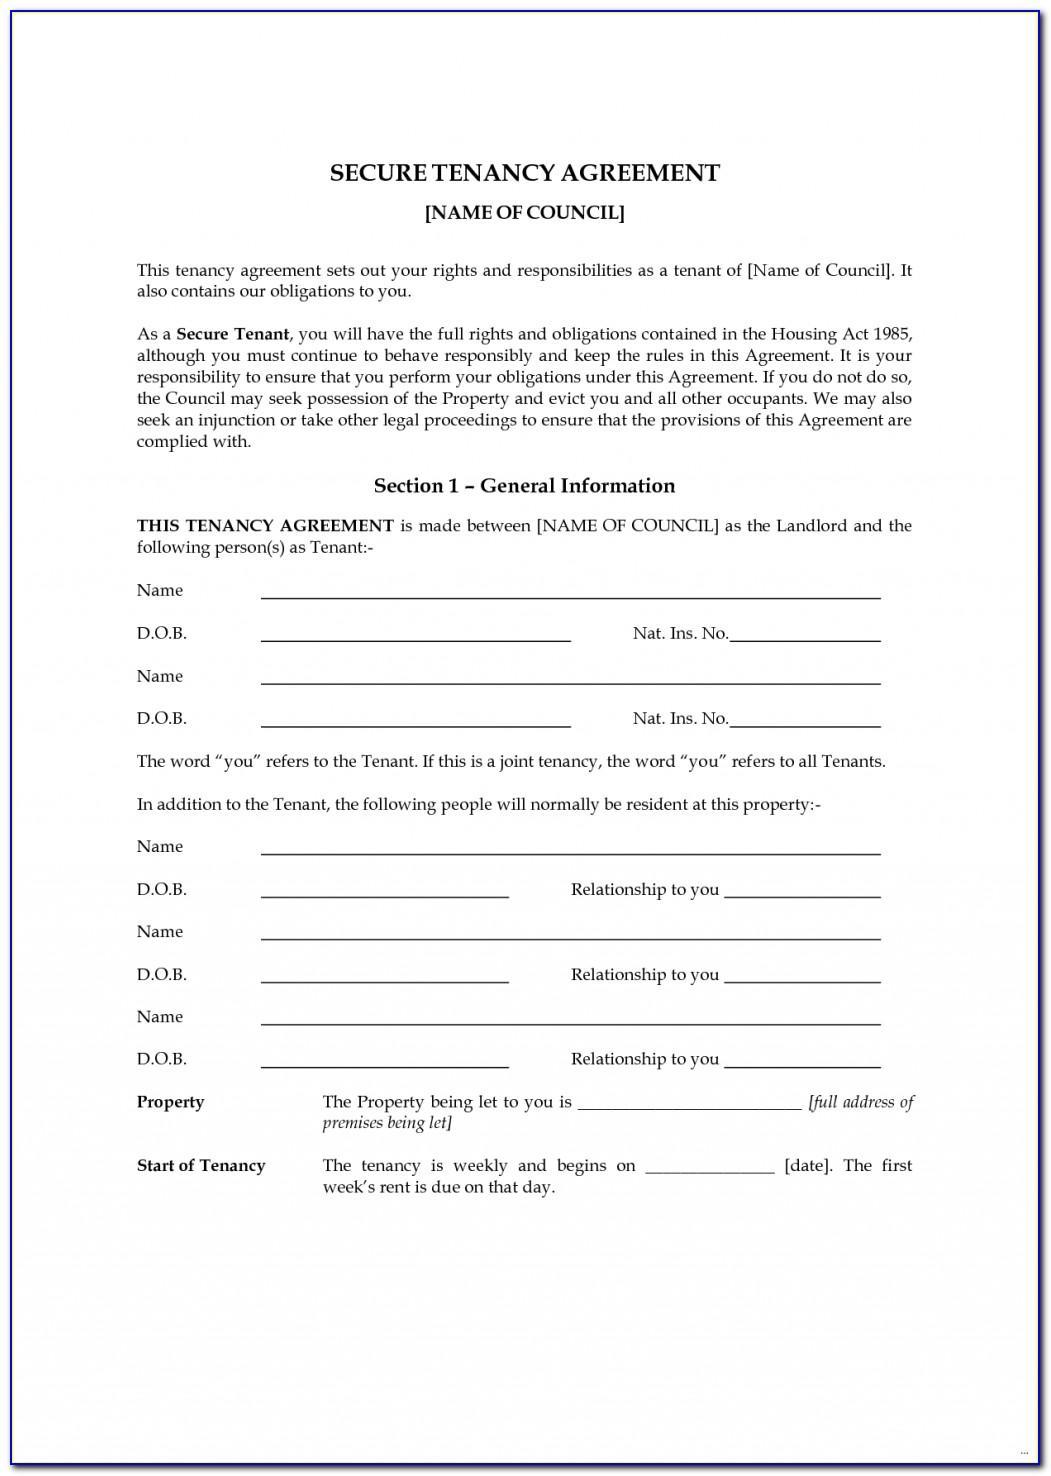 Landlord Tenant Lease Template